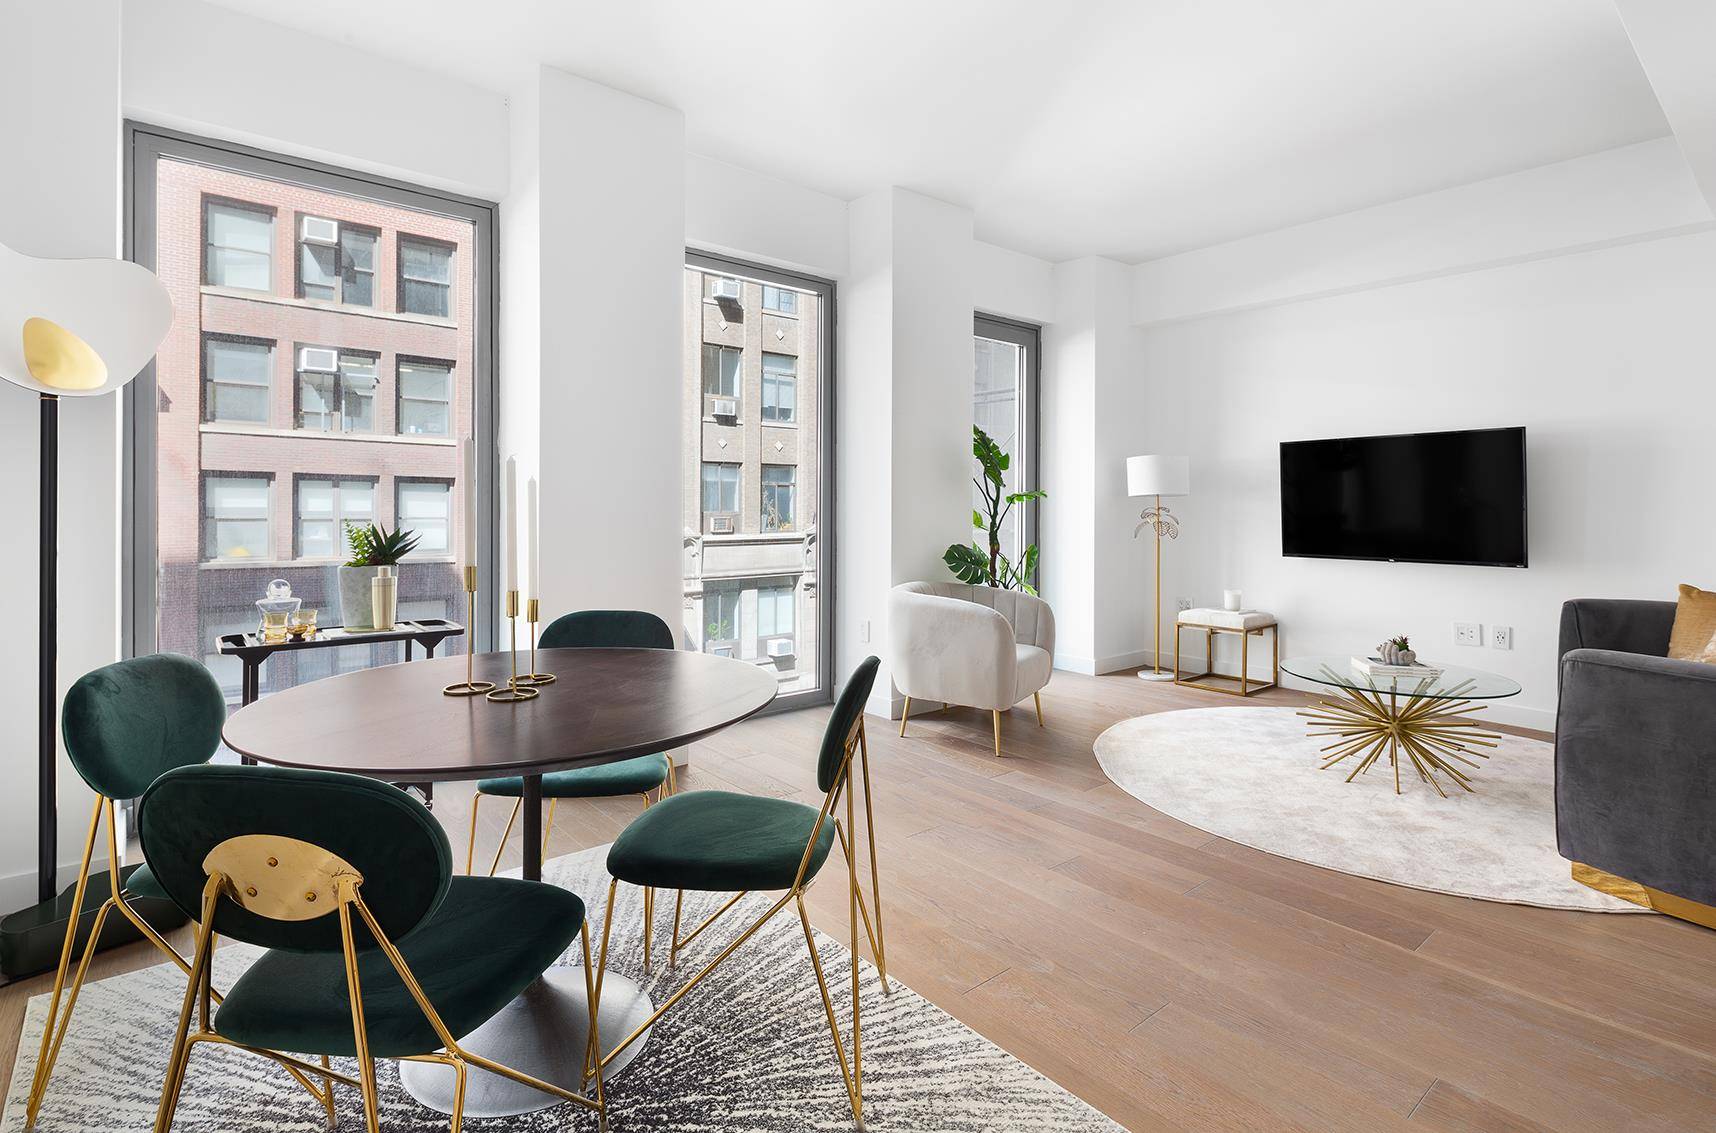 Welcome to the Neo Gothic splendour that is 30 East 31 in the historic and trendy NoMad North of Madison Square Park, an area characterized by varied architectural styles, from ...